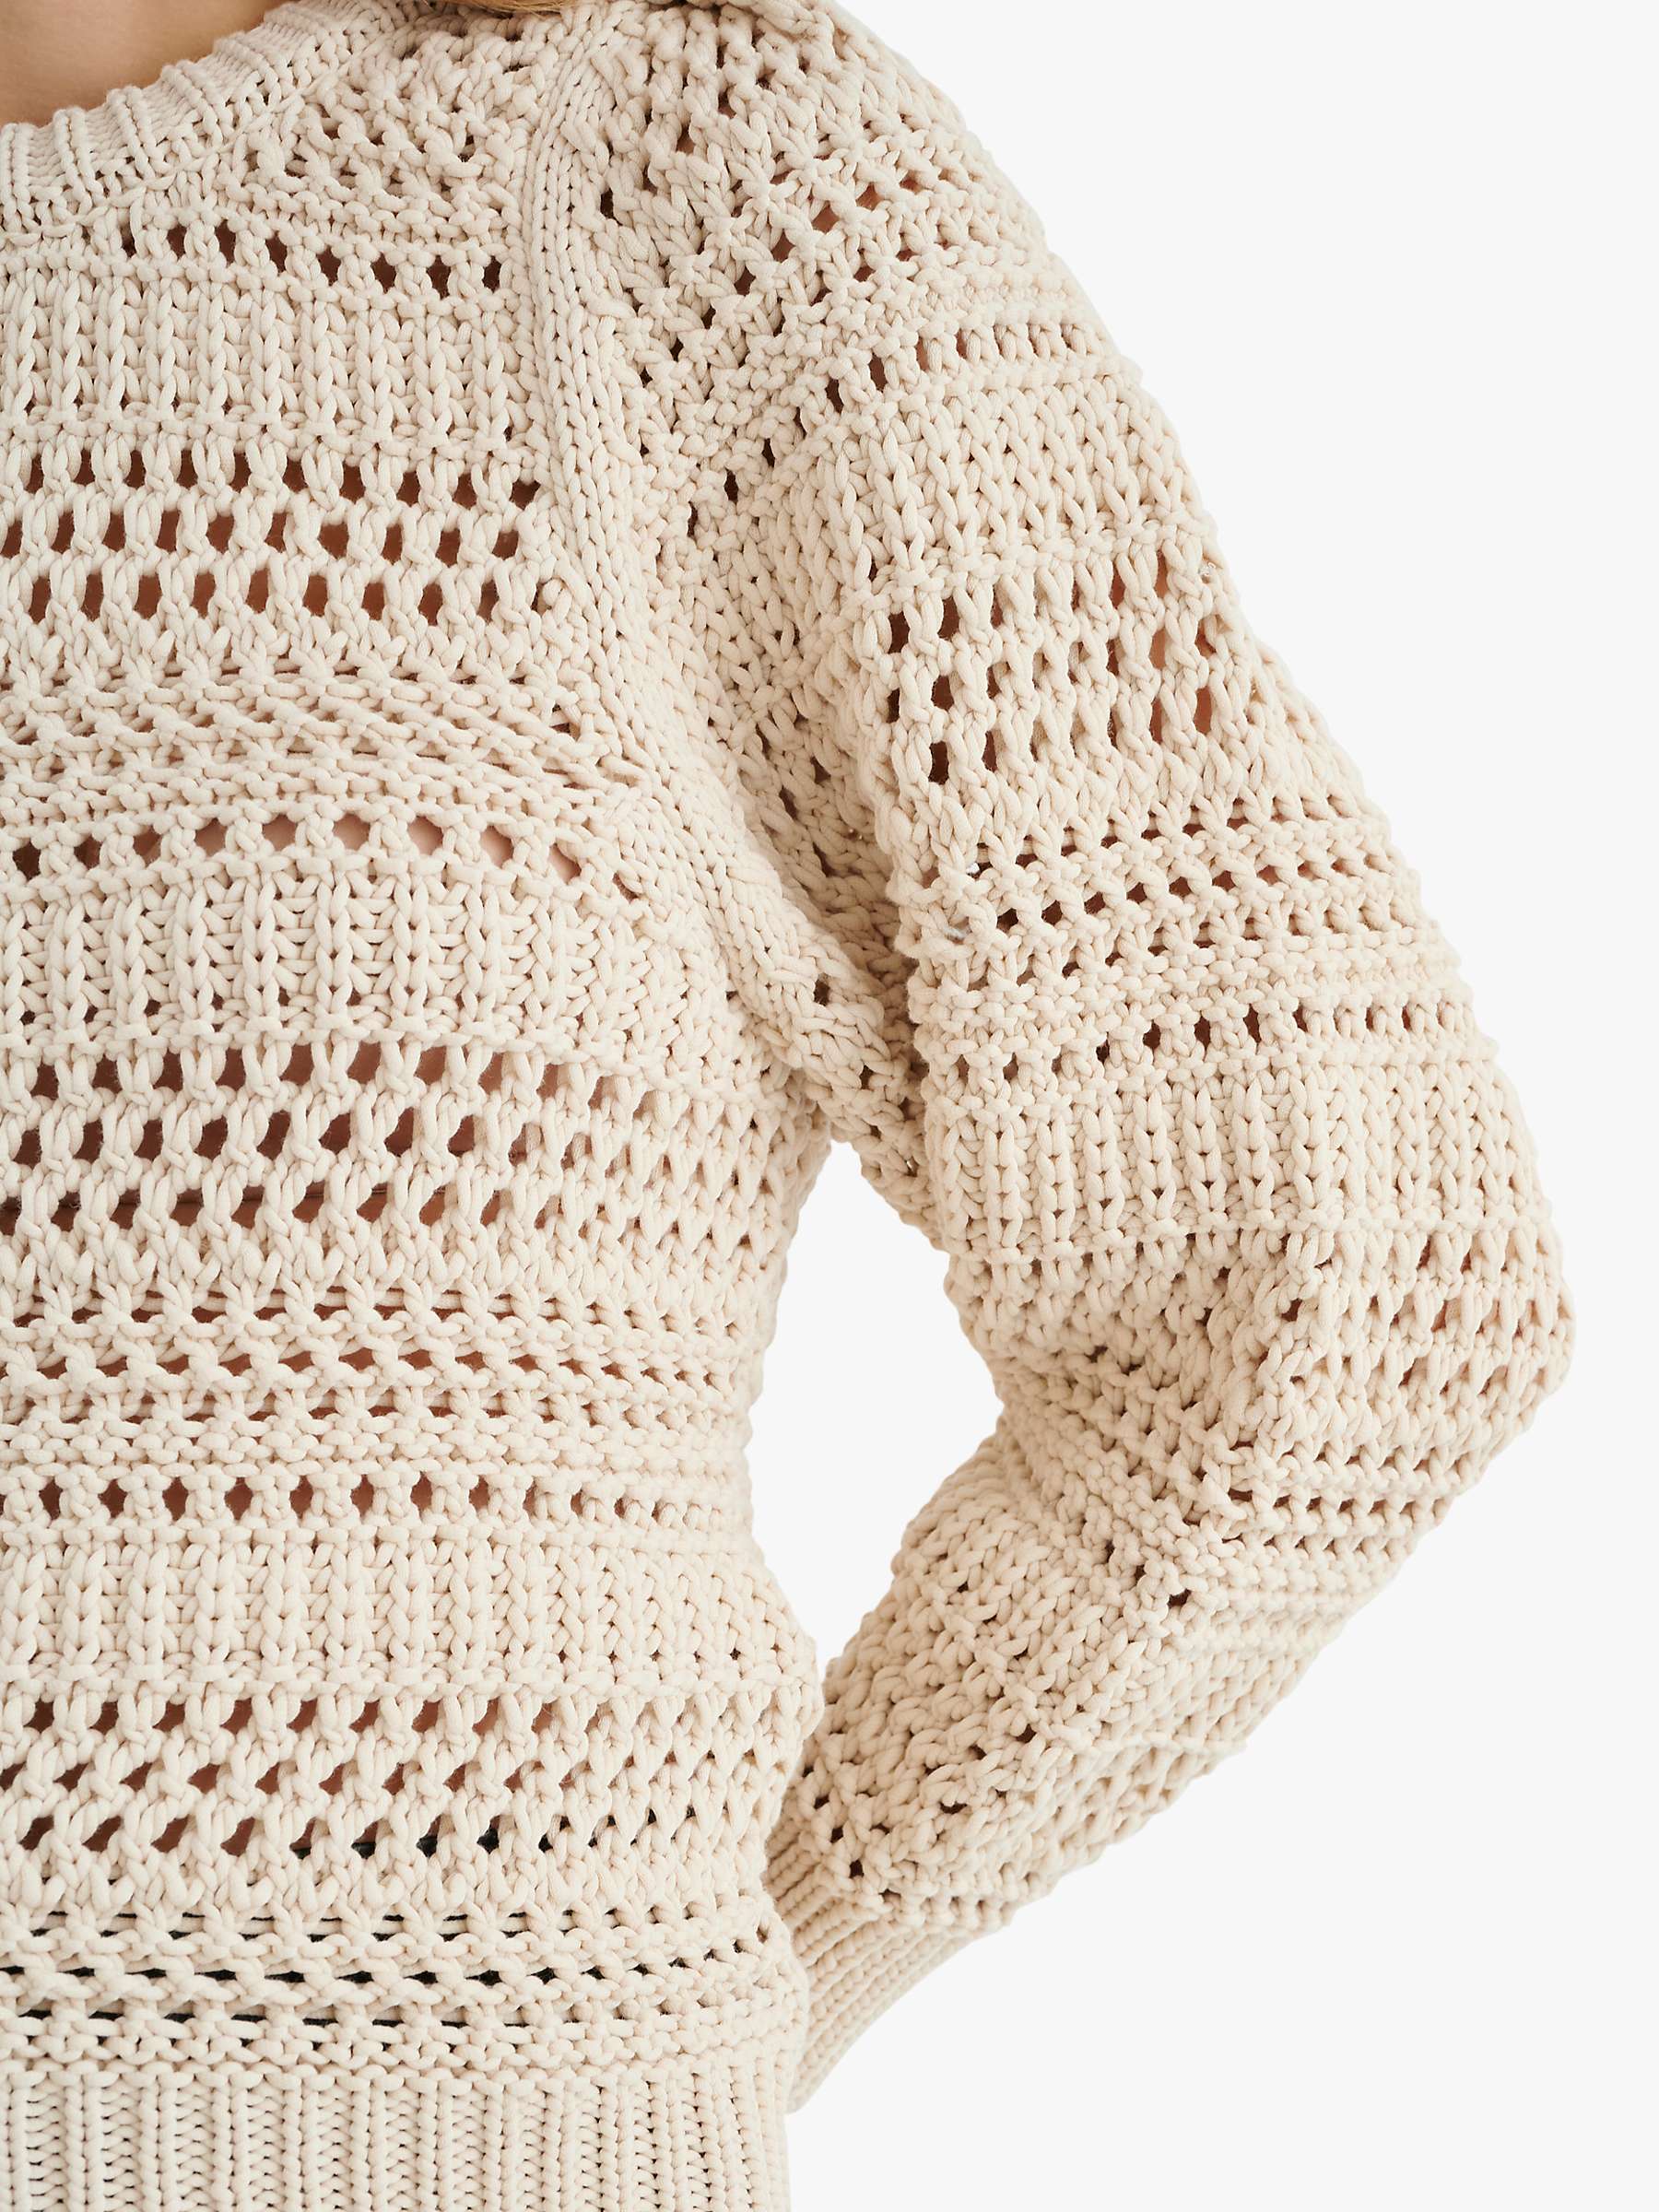 Buy InWear Jus Open Knit Cropped Sleeve Jumper, Eggshell Online at johnlewis.com